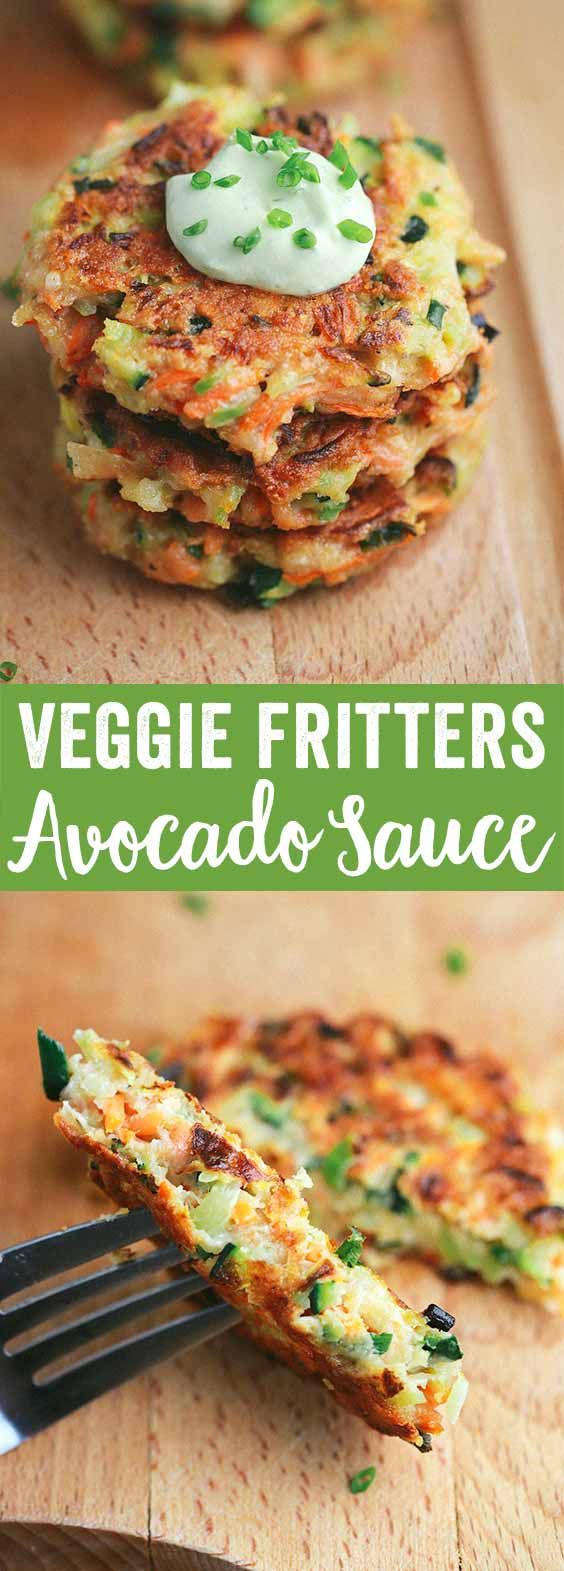 These crispy vegetable fritters are packed with broccoli, carrots and zucchini. Dip each delicious appetizer fritter into the creamy avocado yogurt sauce.